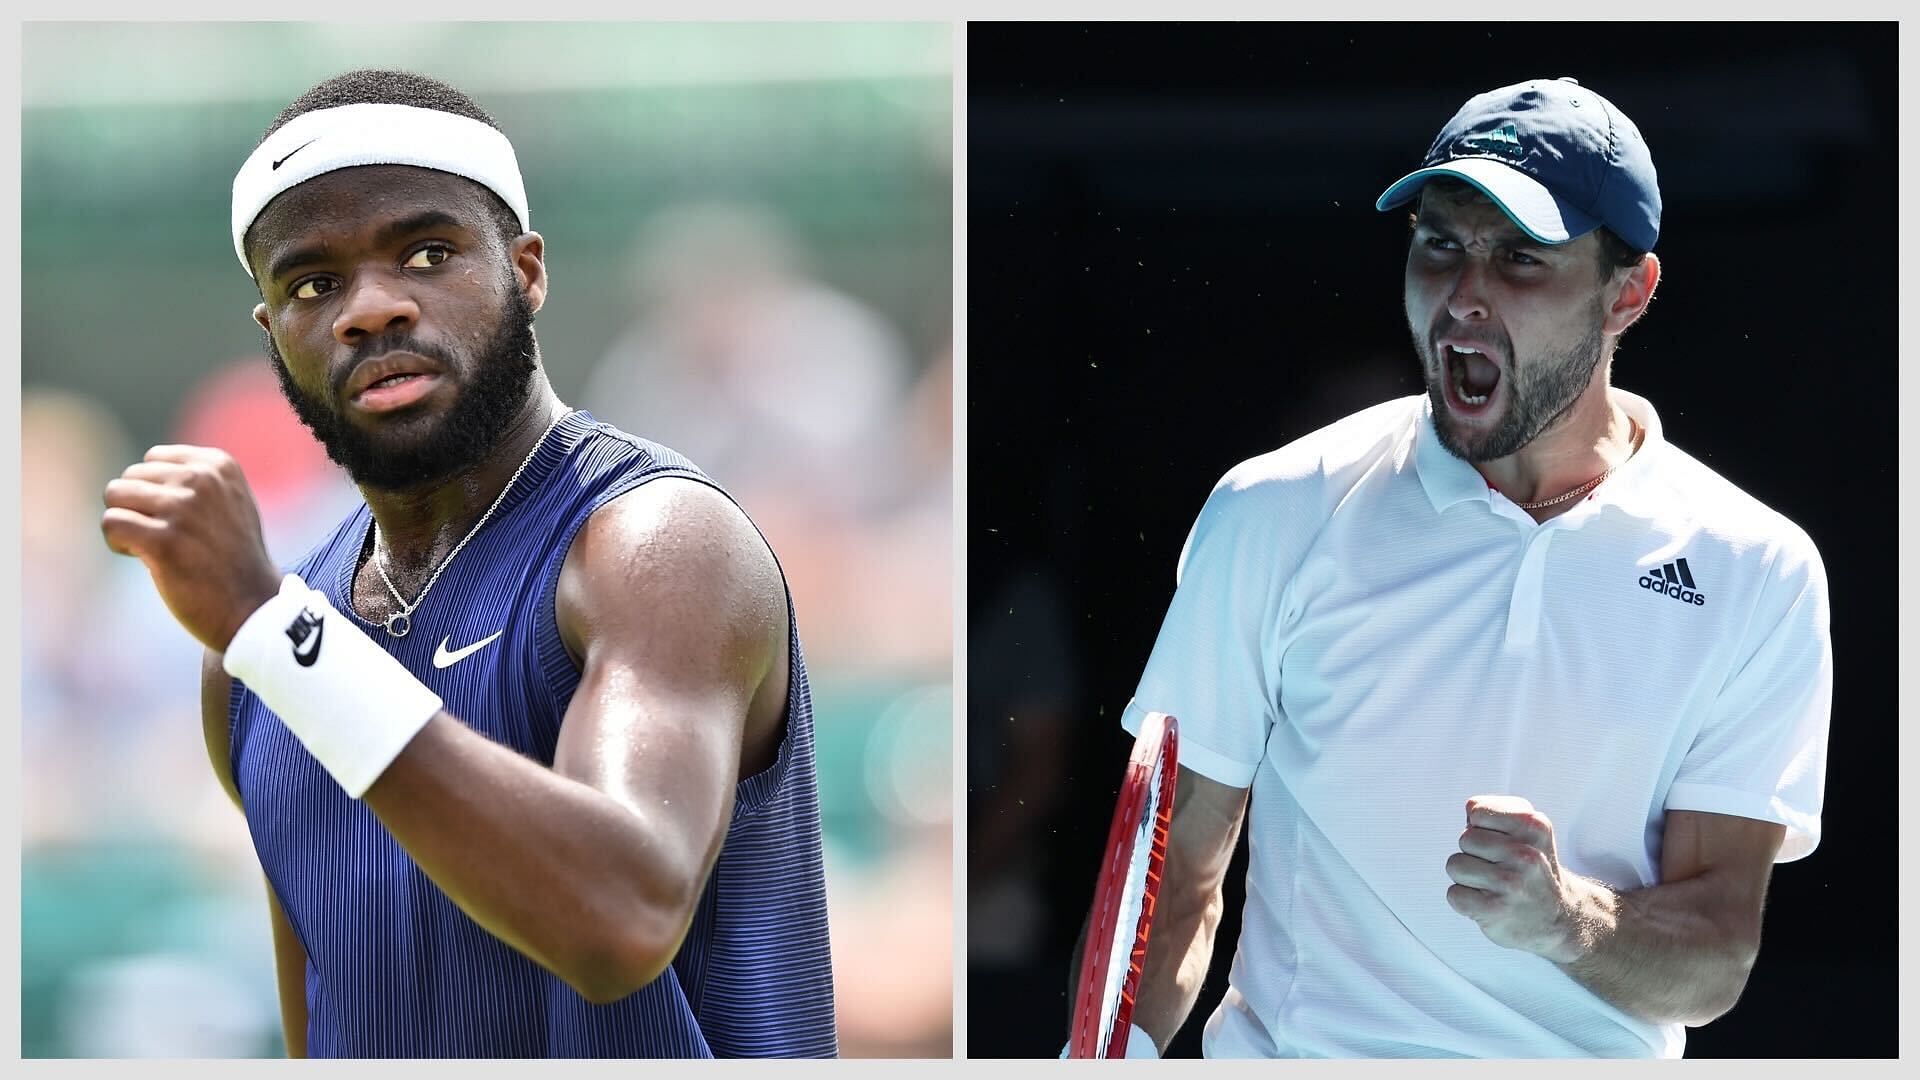 Frances Tiafoe vs Aslan Karatsev is one of the second-round matches at the 2023 Citi Open.